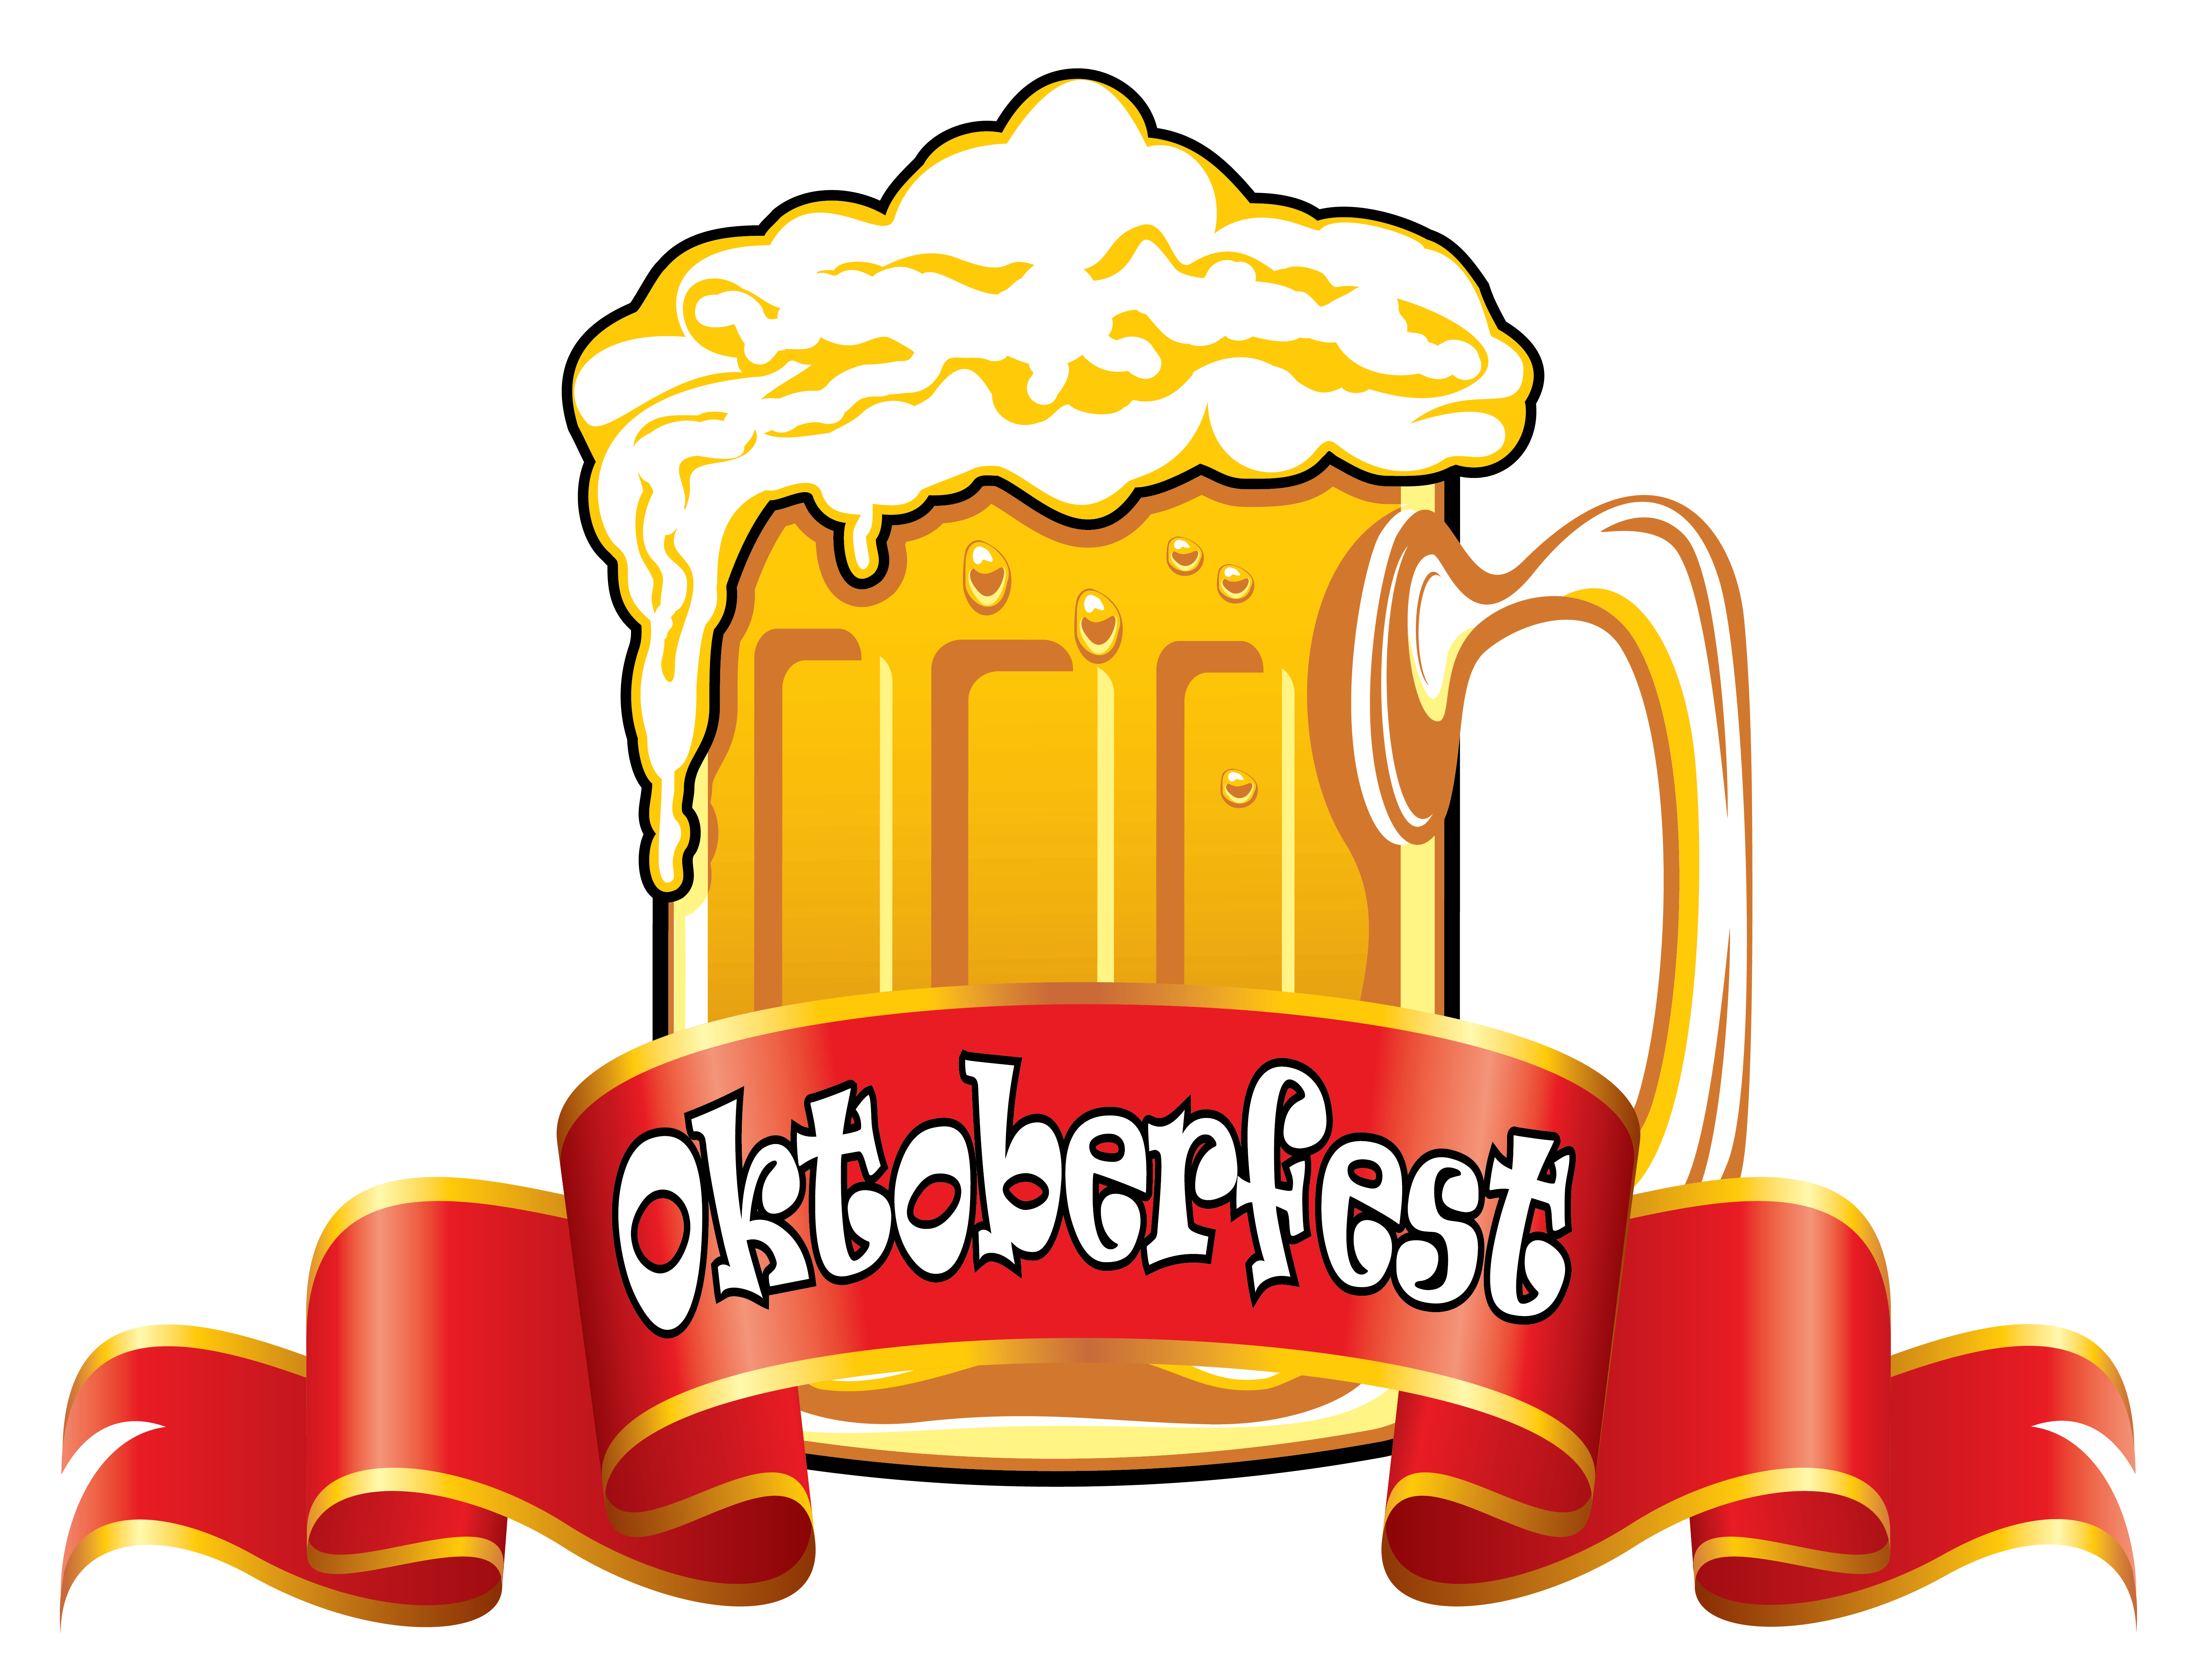 Oktoberfest Red Banner With Beer Image Clipart